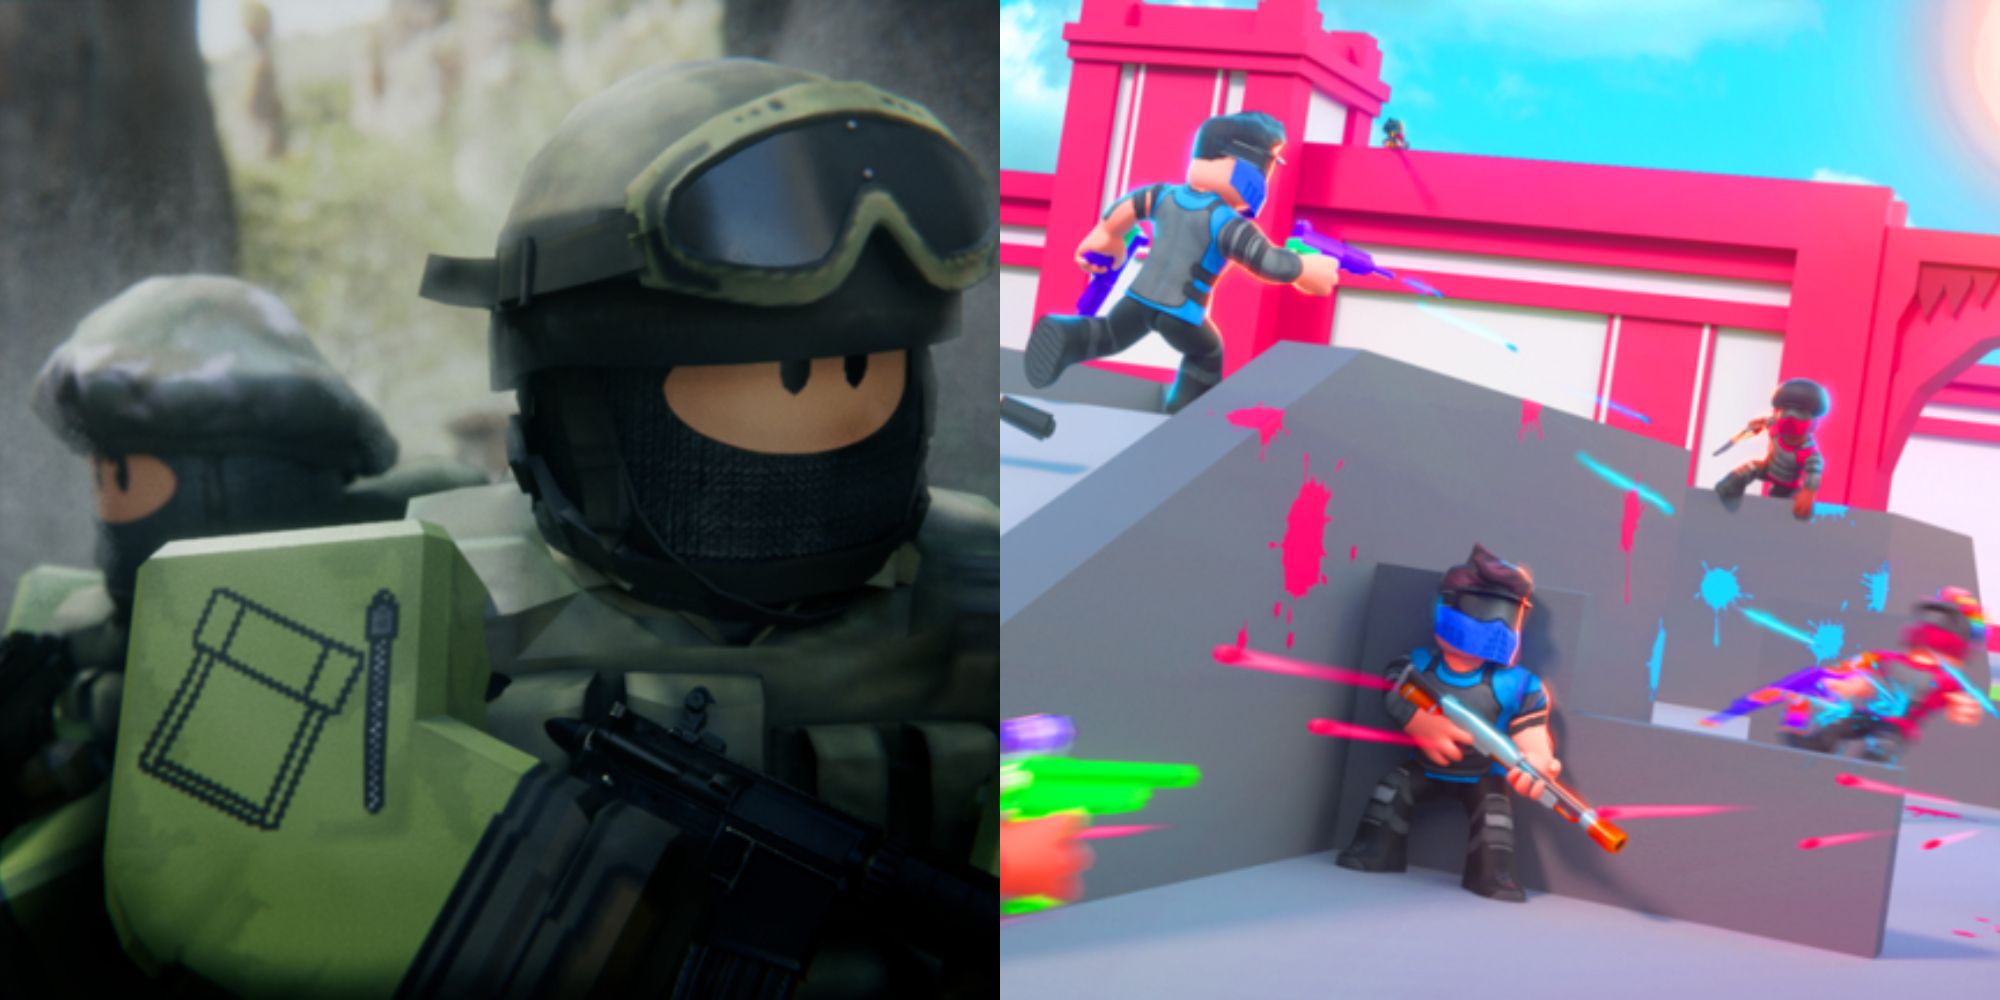 gun games to play on roblox